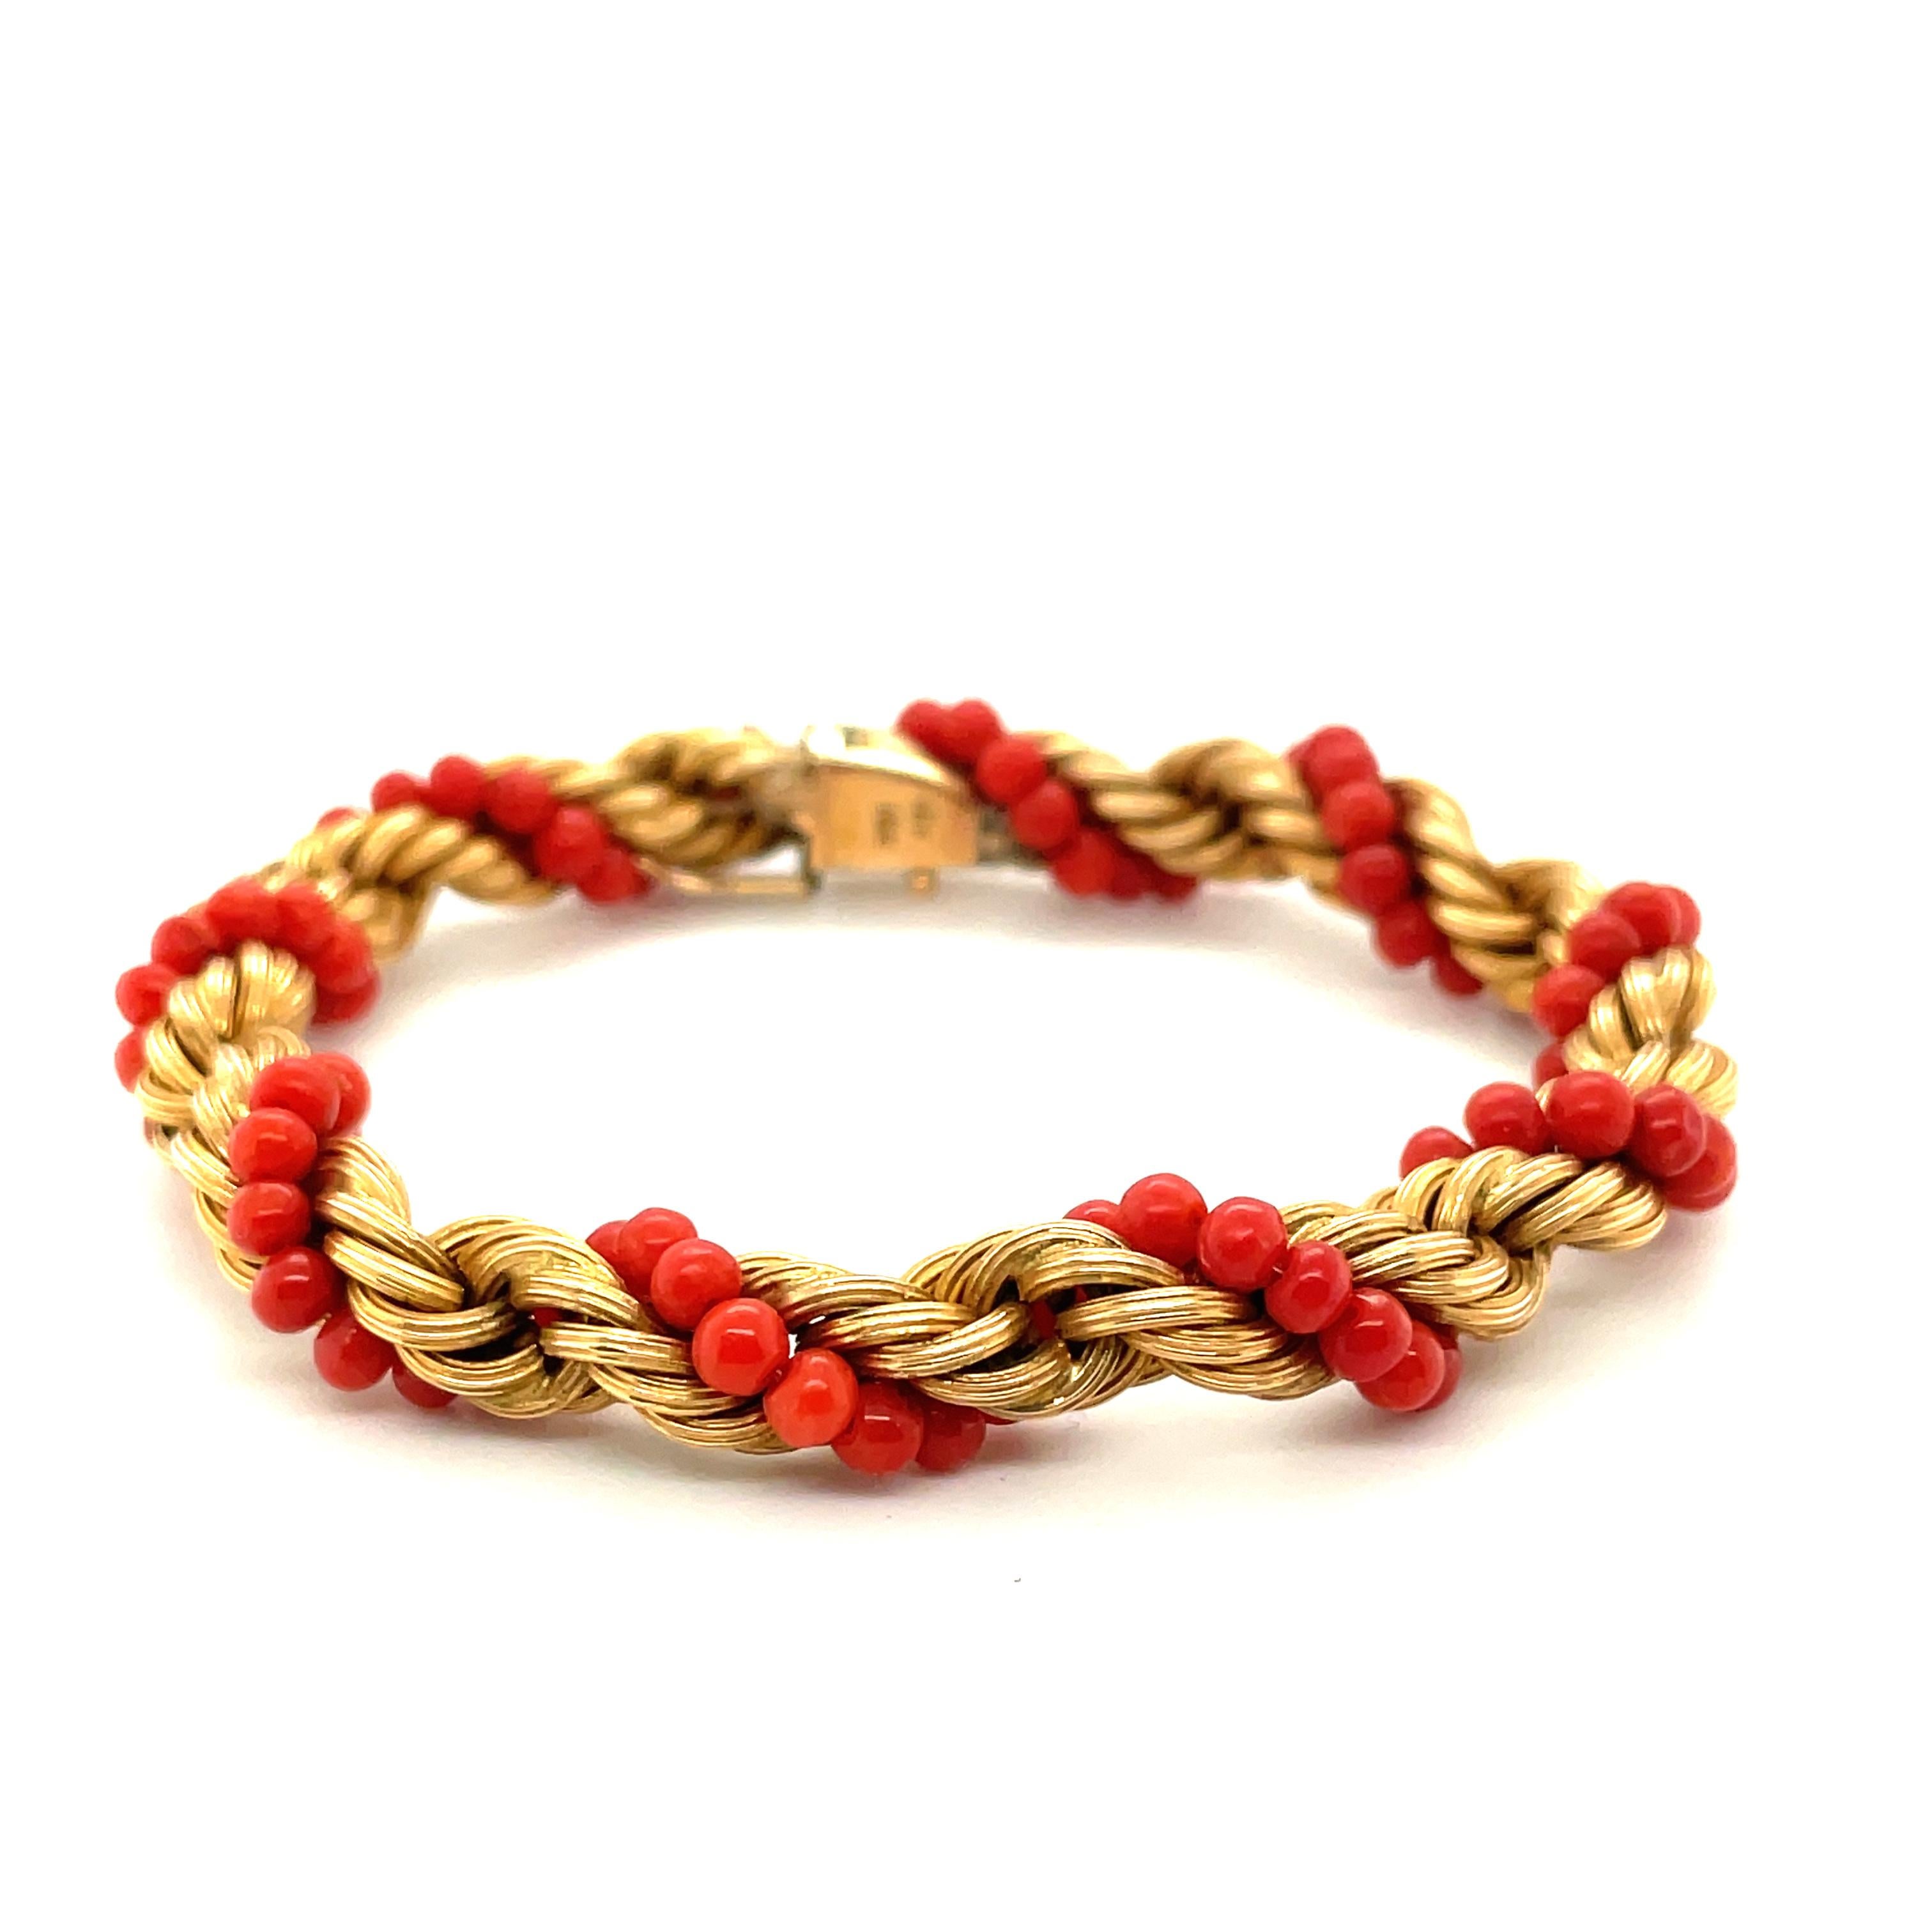 18K Yellow Gold Coral Bead Bracelet

The coral beads are strung on clear monofilament, twisted around the gold spiral components, and wound/tied at the ends. The bracelet is completed by a box clasp with figure-8 safety lock.

Dimensions: 6 1/4